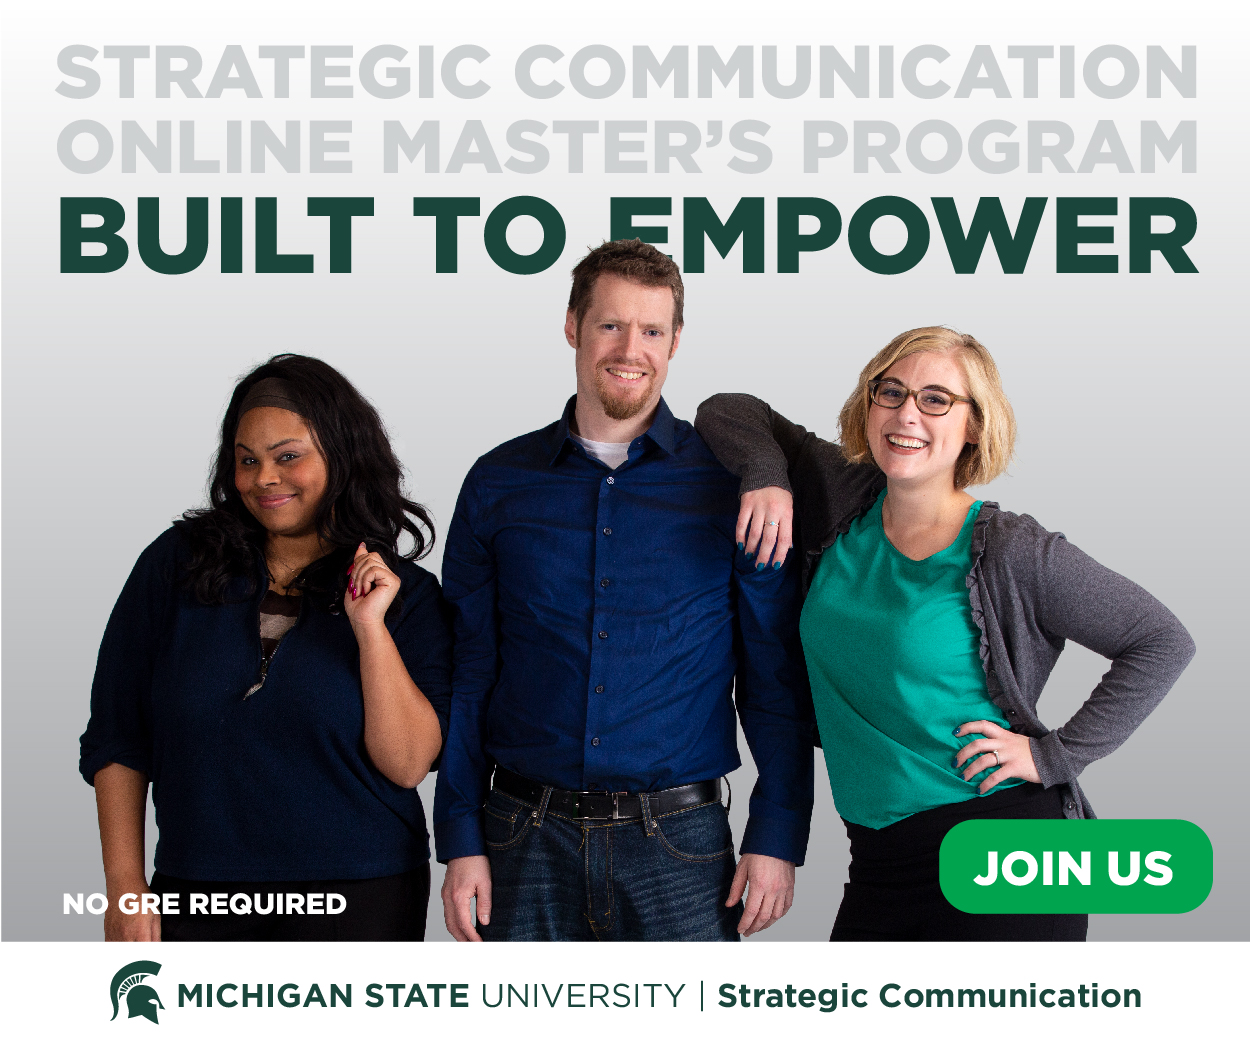 Click to learn more about the online M.A. in Strategic Communication from Michigan State University